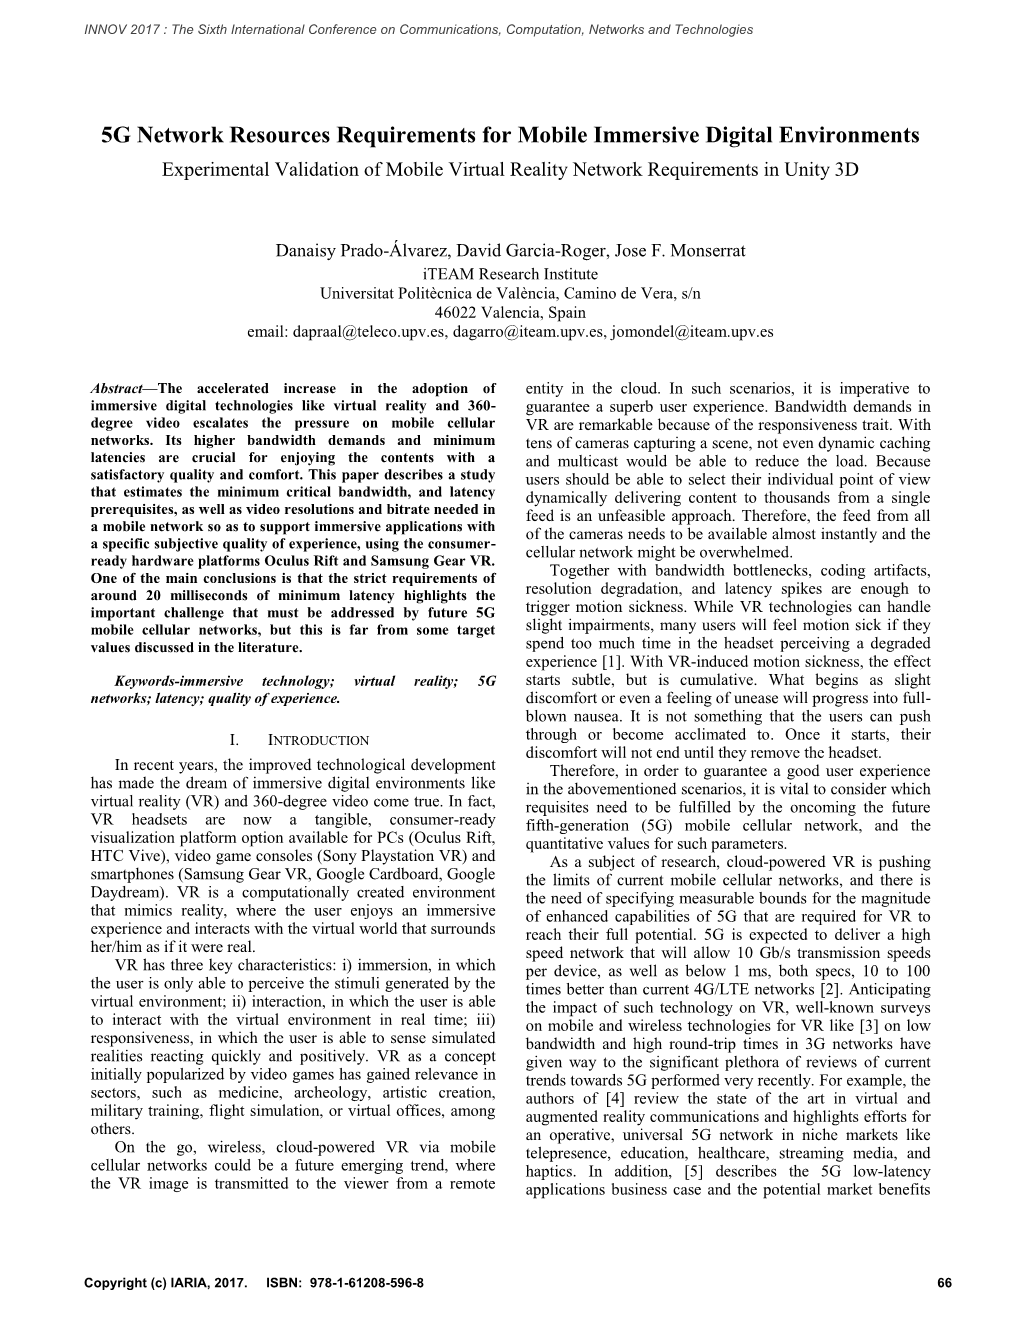 5G Network Resources Requirements for Mobile Immersive Digital Environments Experimental Validation of Mobile Virtual Reality Network Requirements in Unity 3D